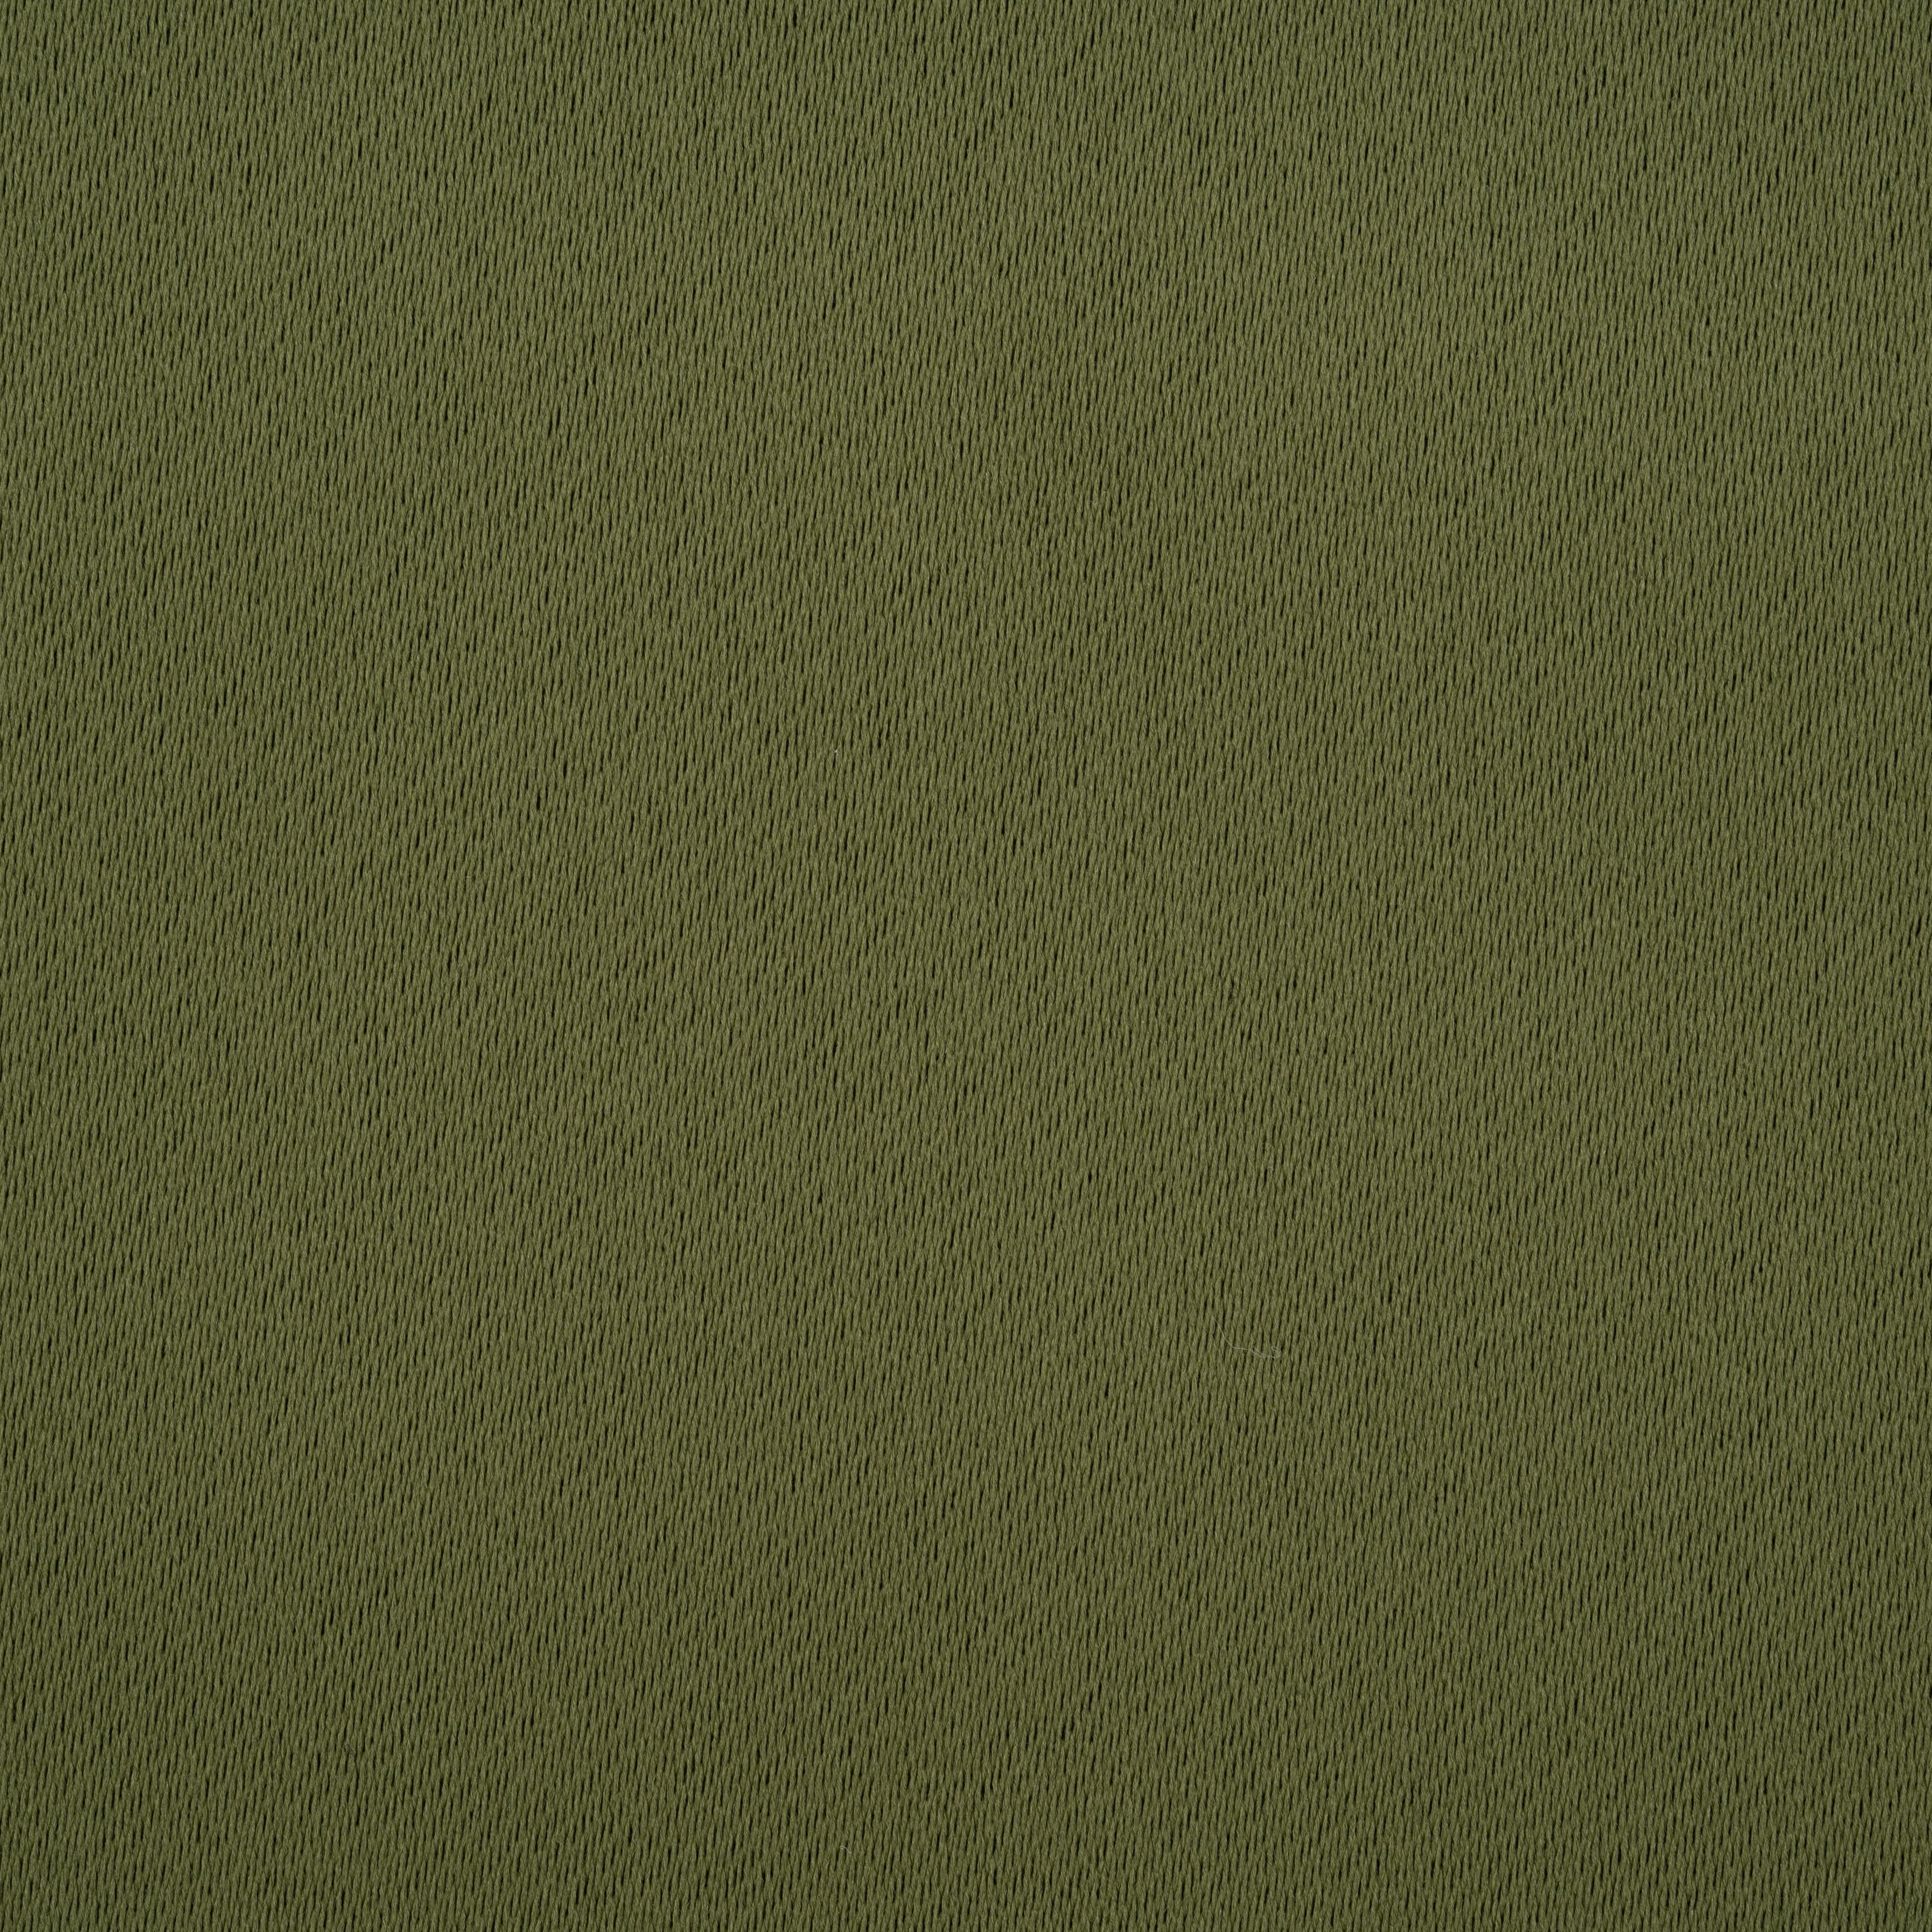 Minerals Olive Green Plain Dimout Roman Blinds